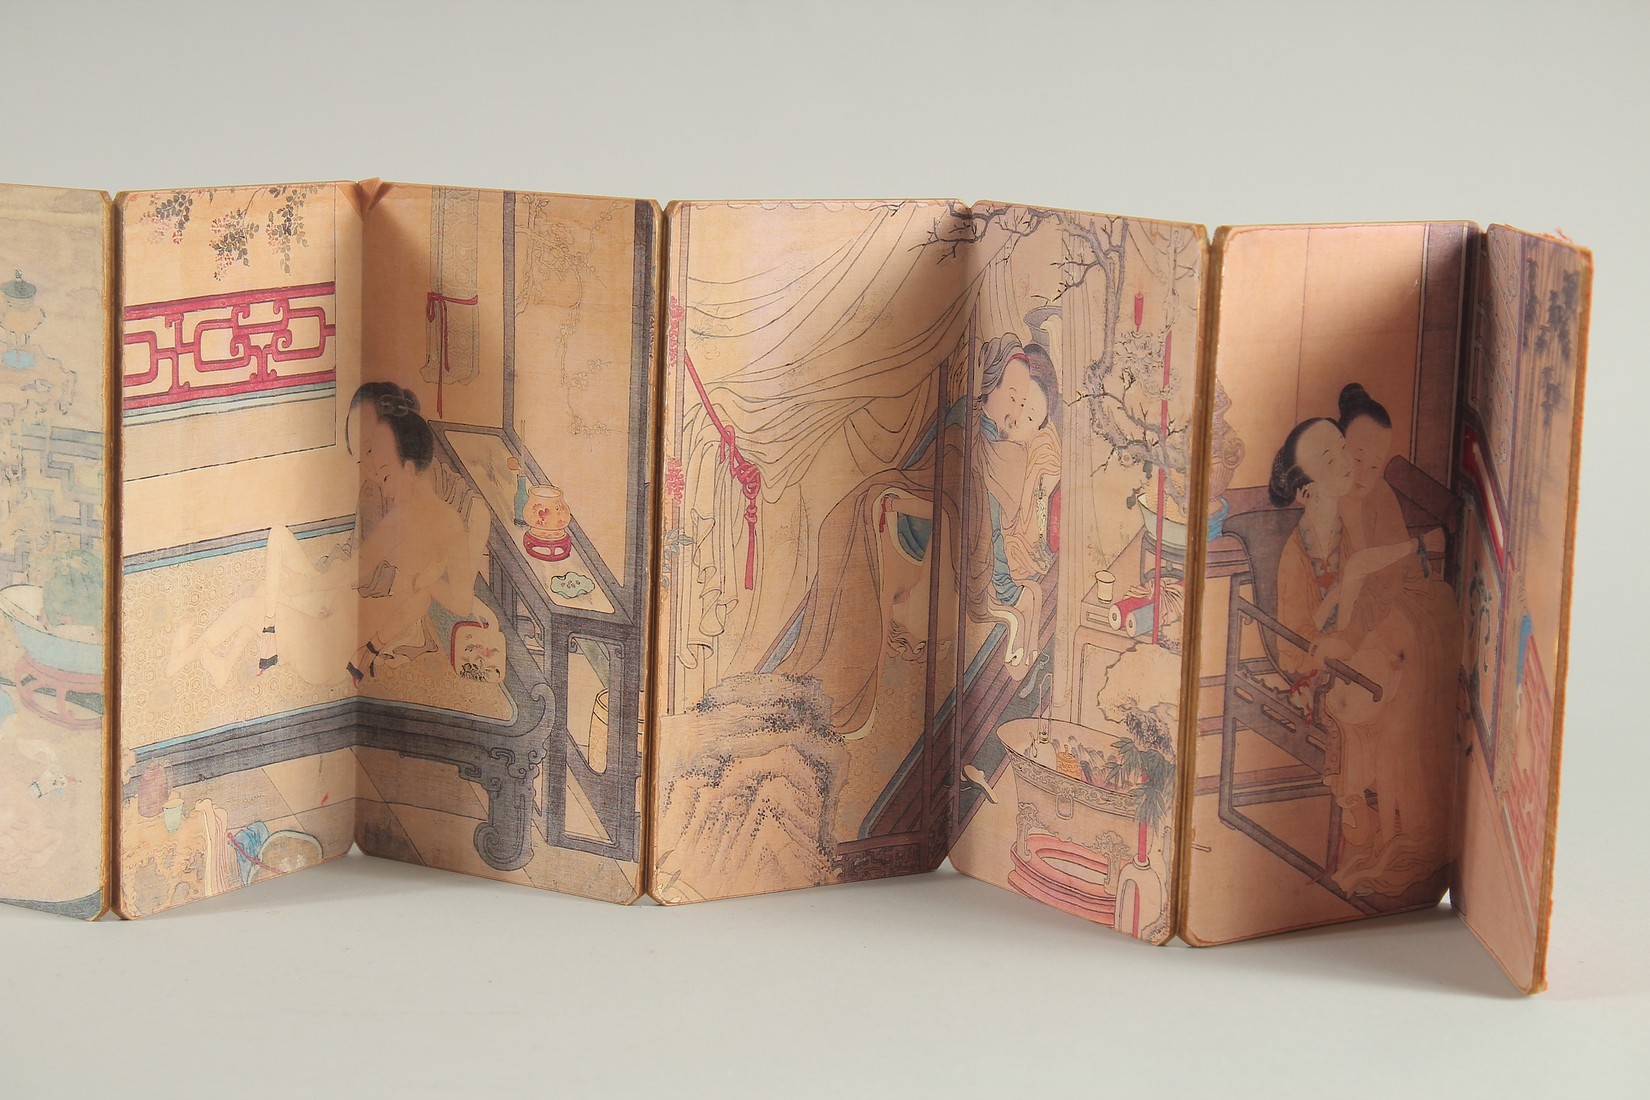 A CHINESE FOLDING EROTIC BOOK. - Image 3 of 3